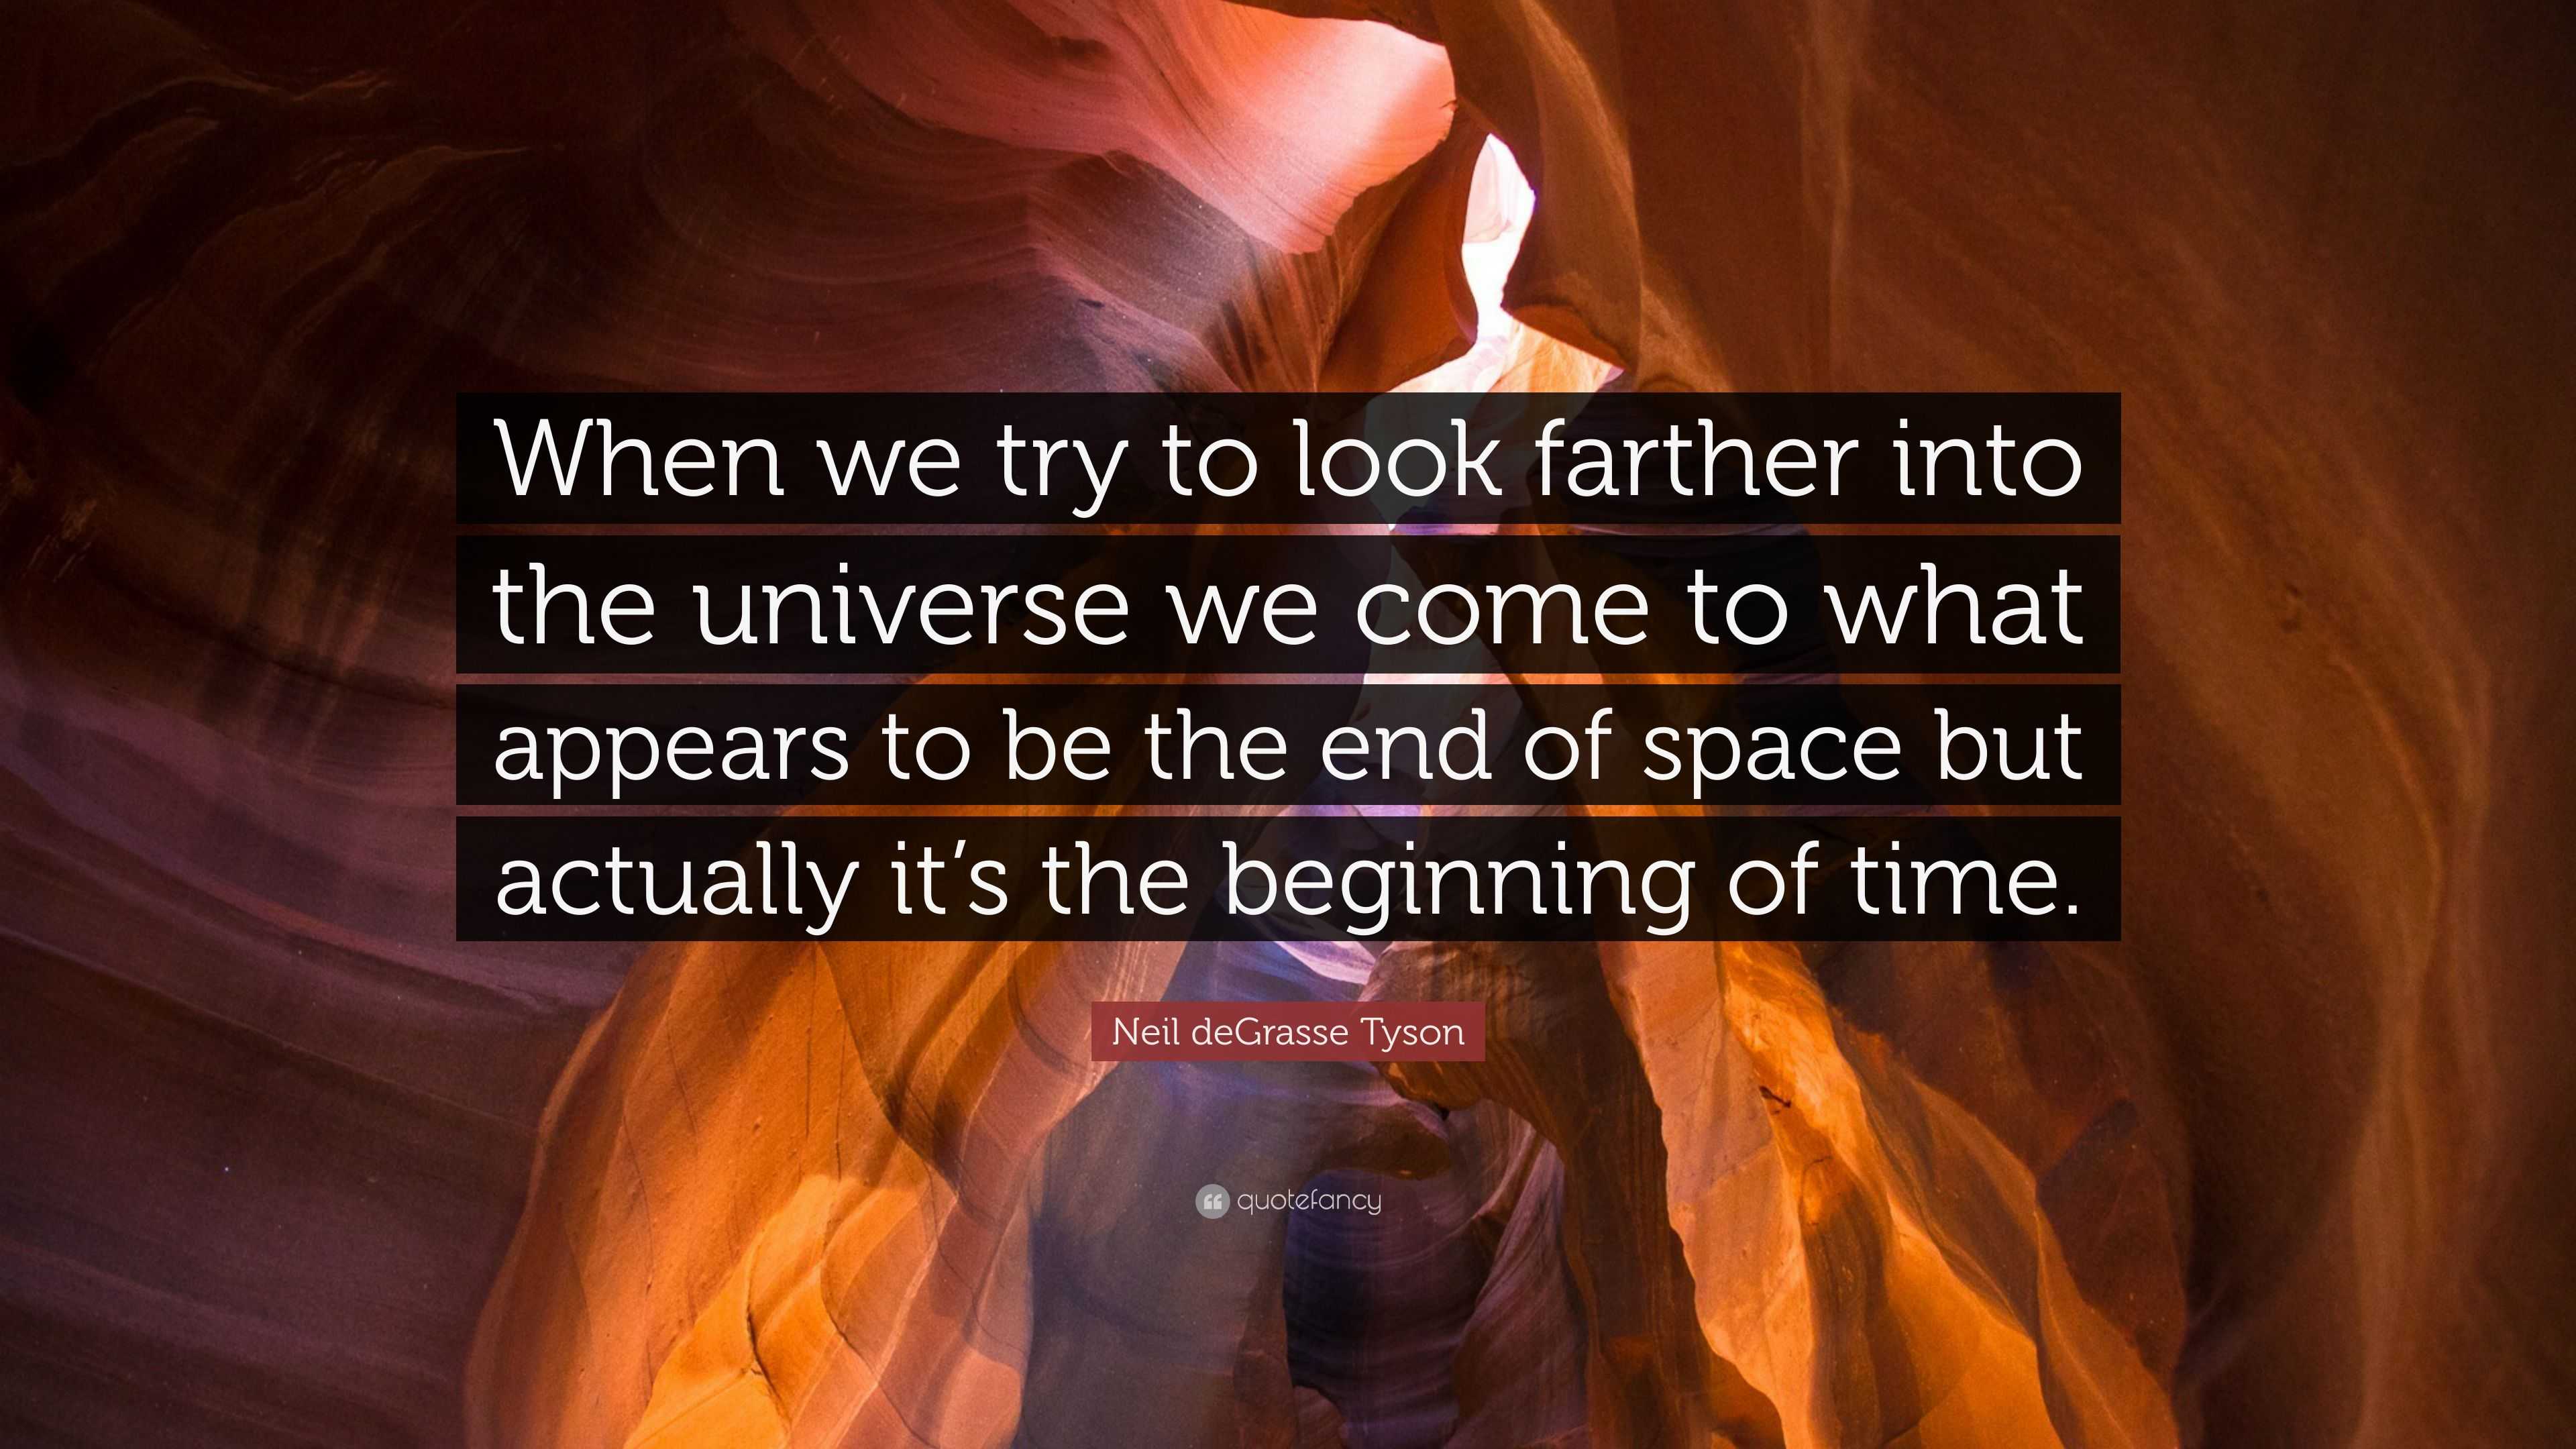 Neil deGrasse Tyson Quote: “When we try to look farther into the ...